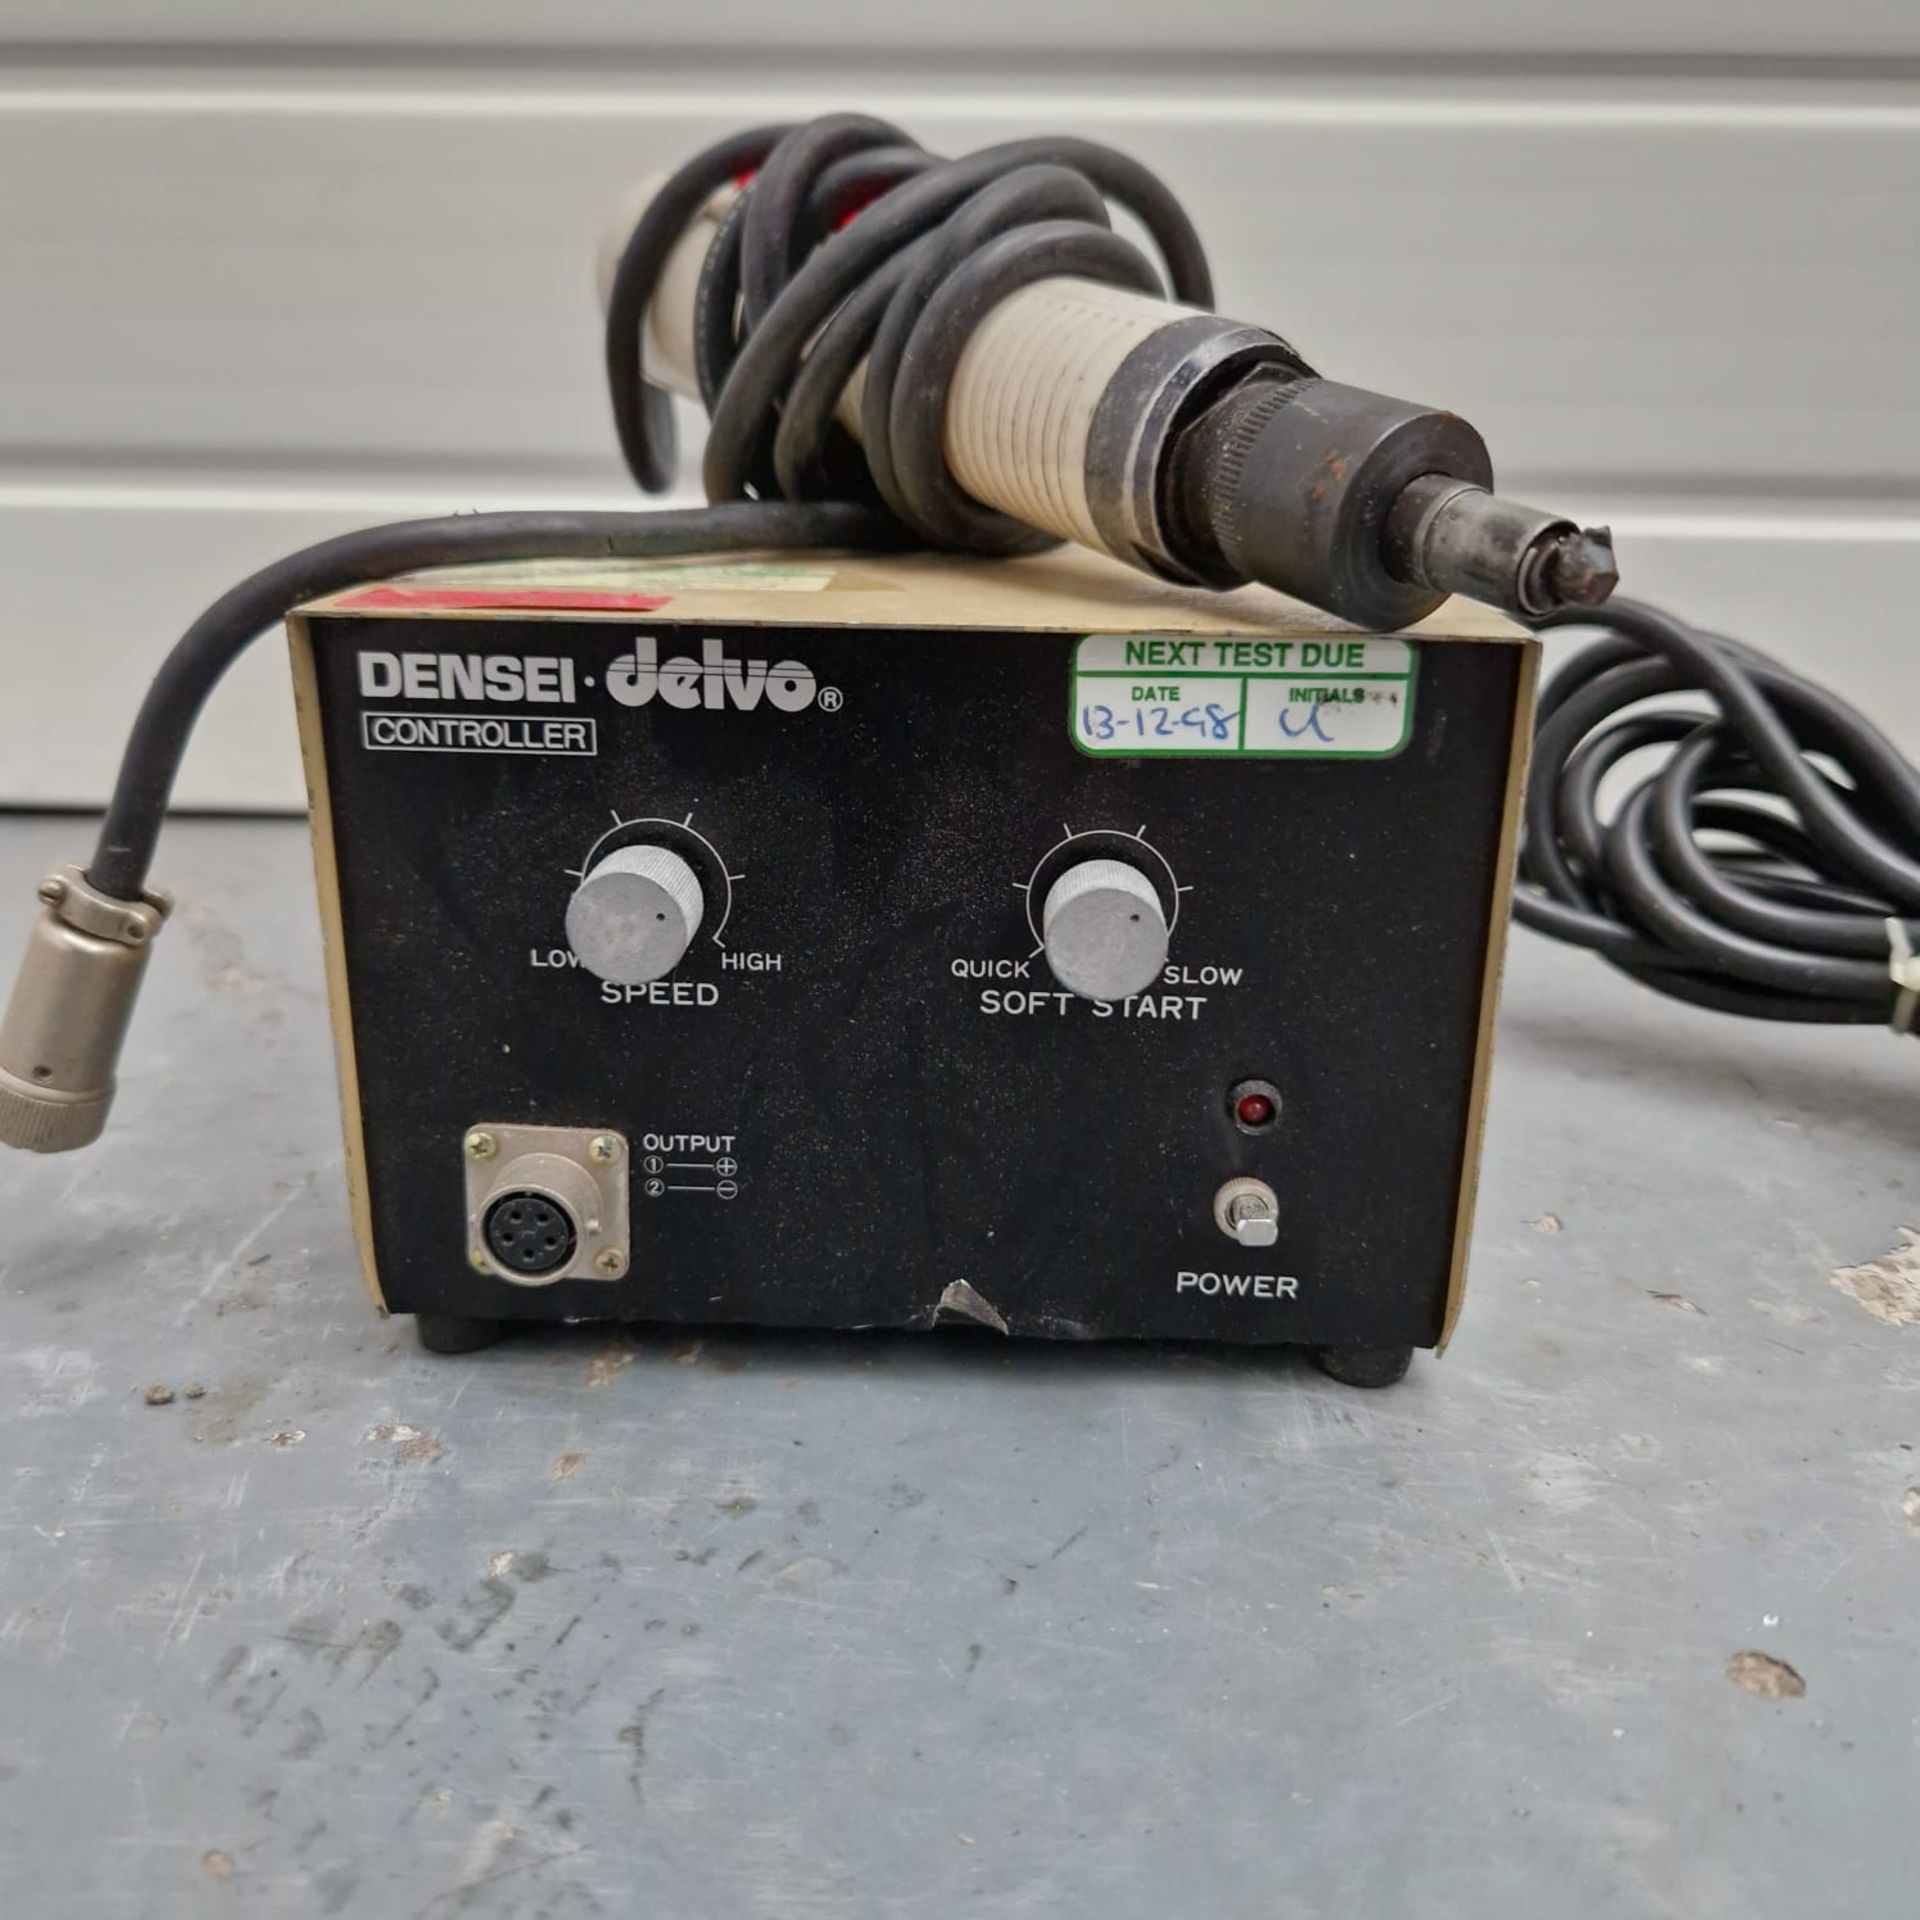 Delvo Electric Screwdriver with Screwdriver Control Unit. - Image 2 of 6